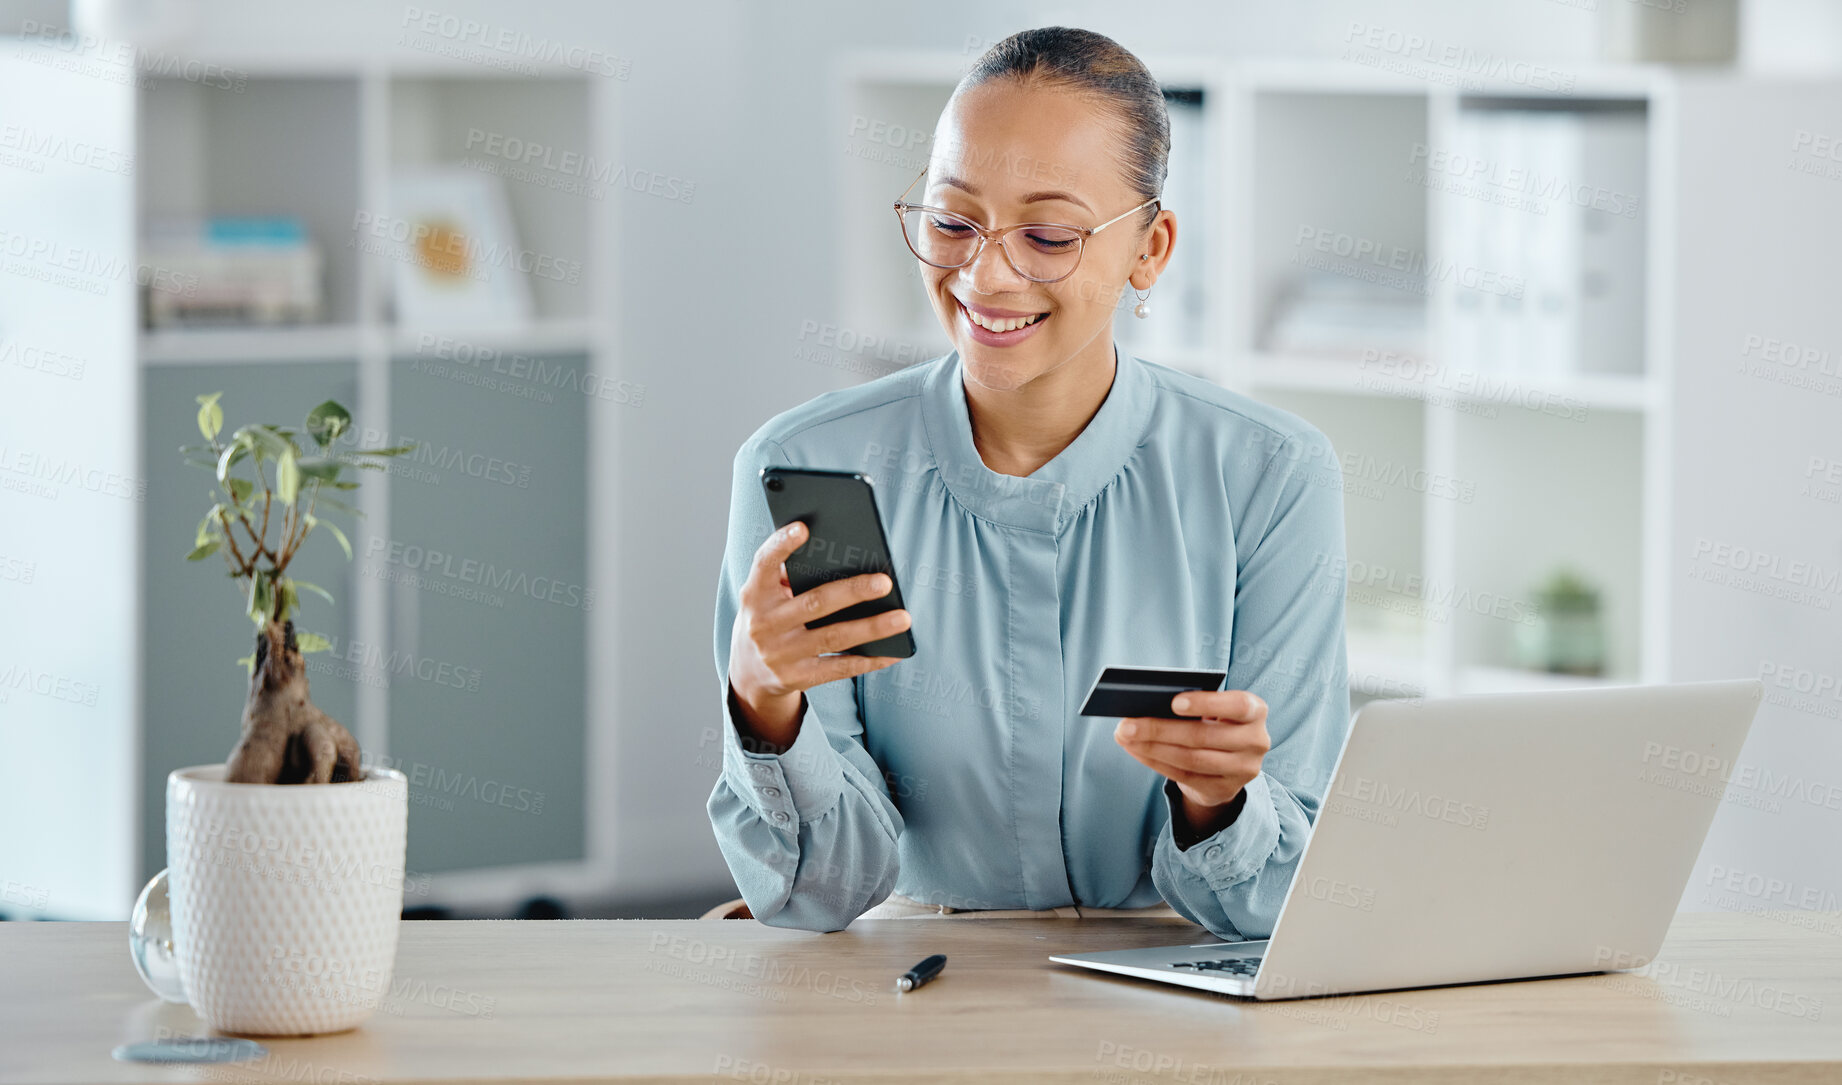 Buy stock photo Female executive online shopping, buying with a corporate credit card on a phone. A smiling woman paying business bills, sitting at office desk with laptop. Happy lady making a purchase on a website.